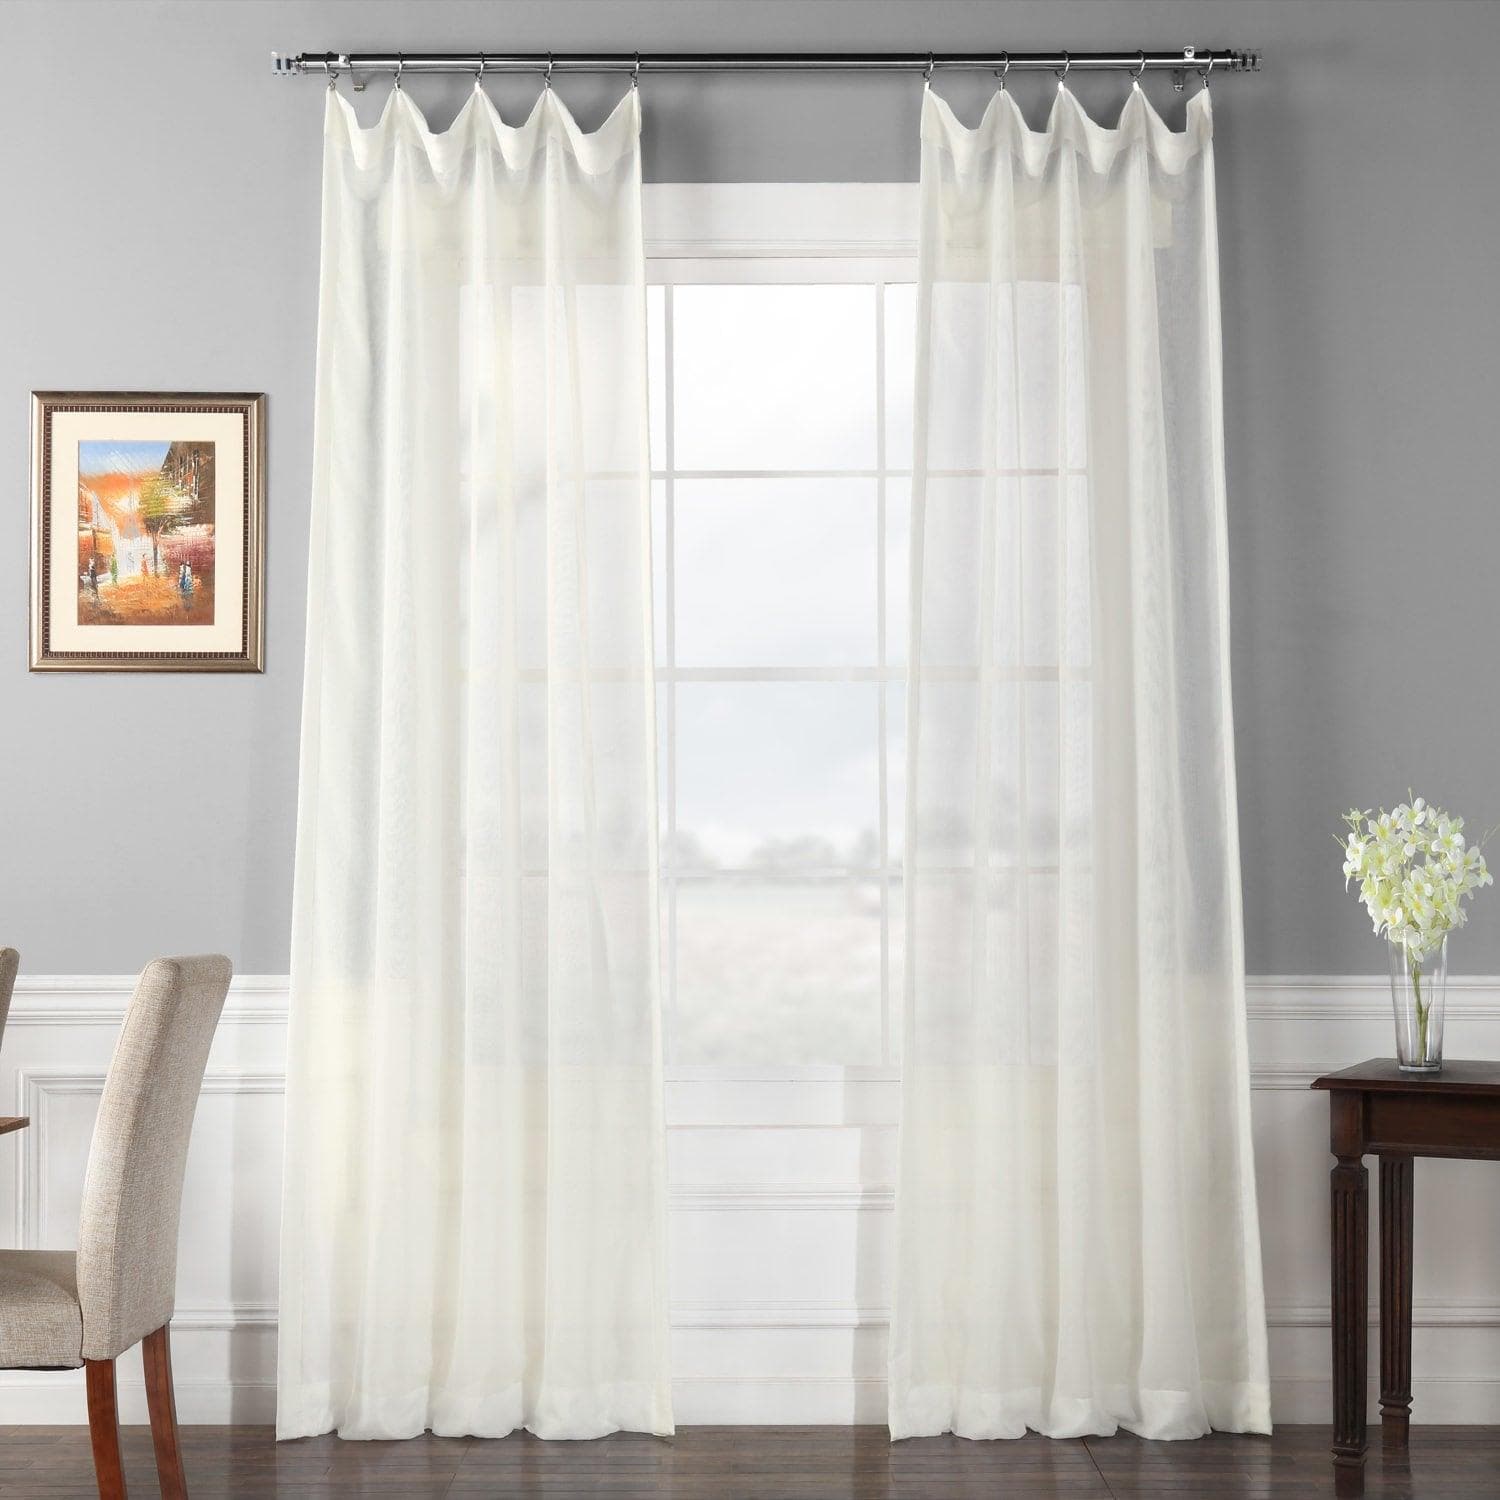 Double Layered Off White Voile Sheer Curtain